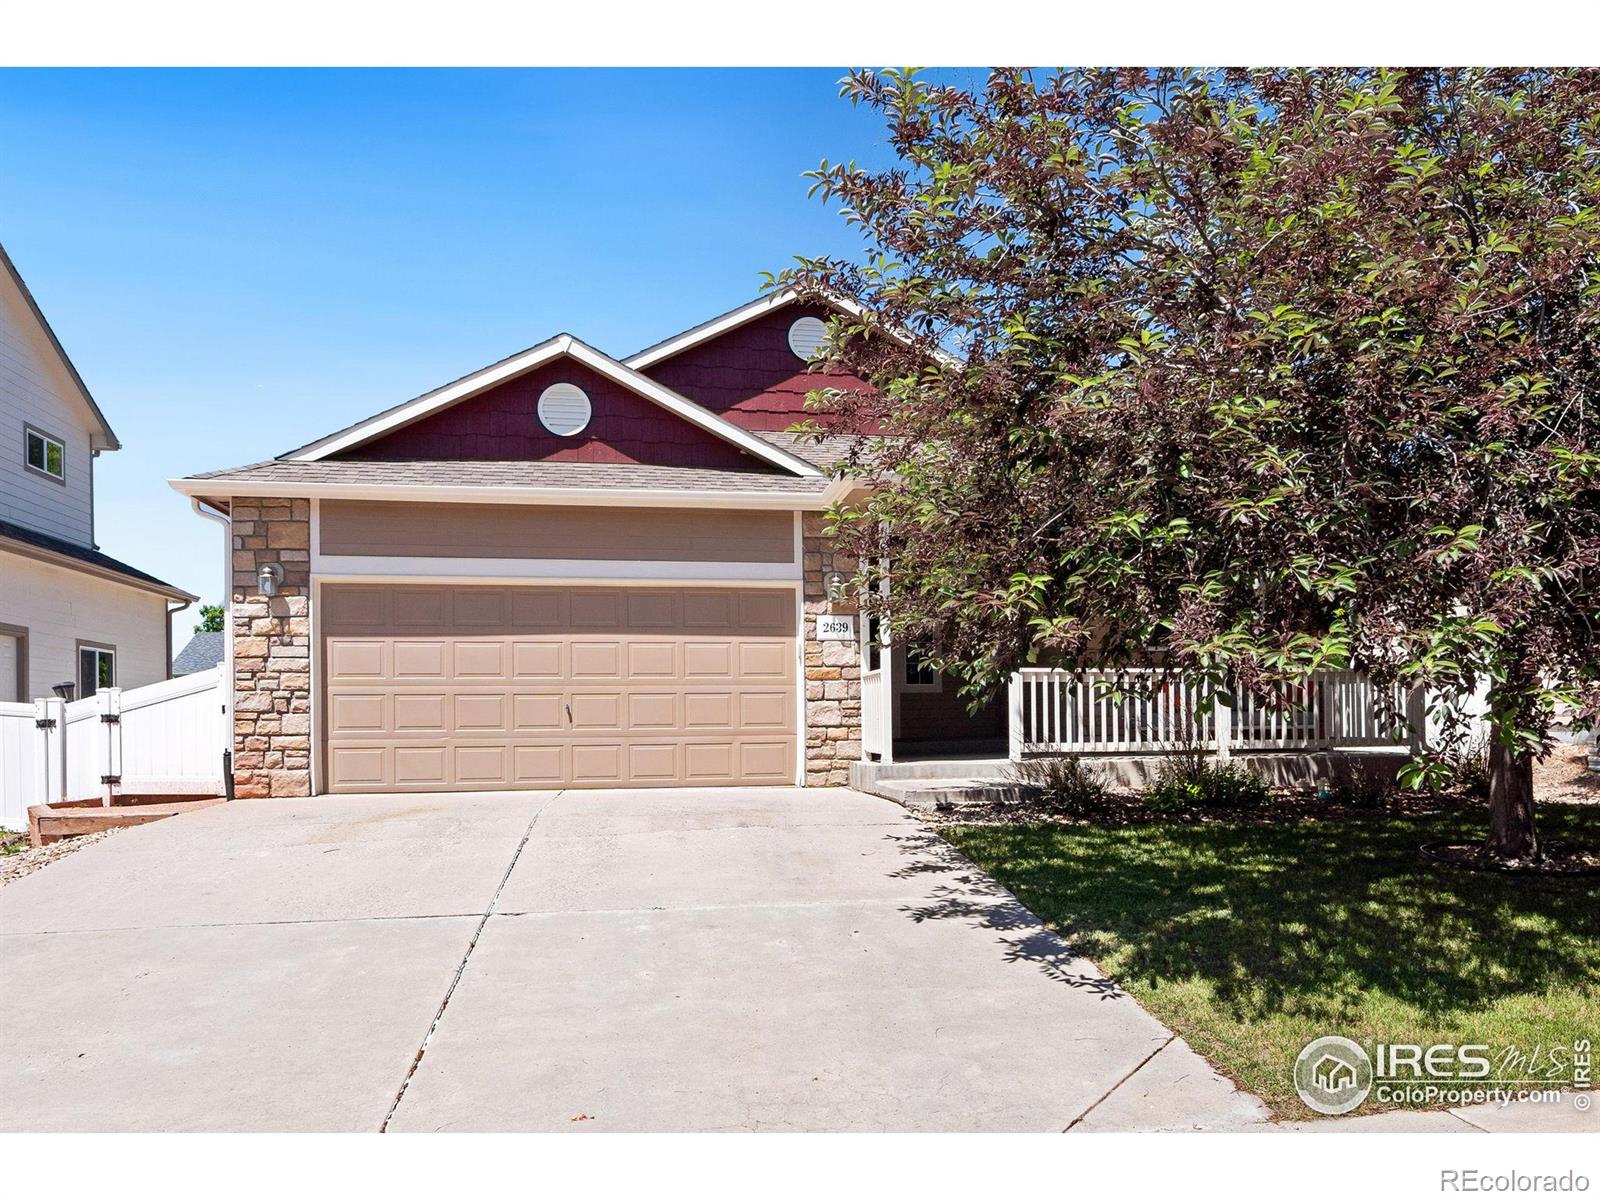 Report Image for 2639  Thoreau Drive,Fort Collins, Colorado